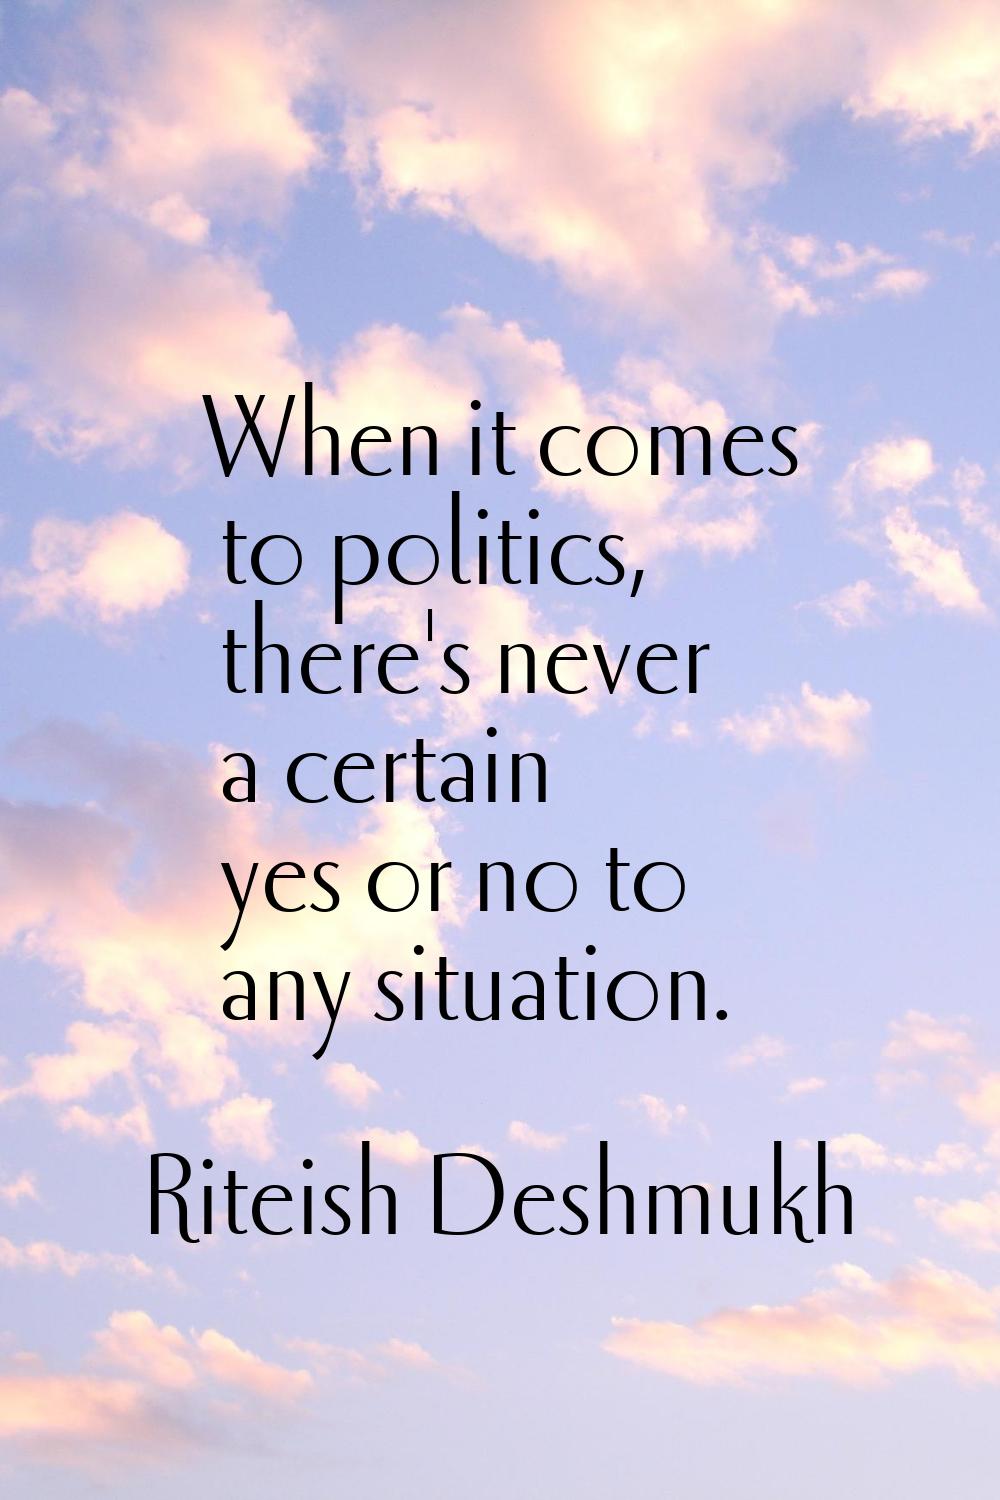 When it comes to politics, there's never a certain yes or no to any situation.